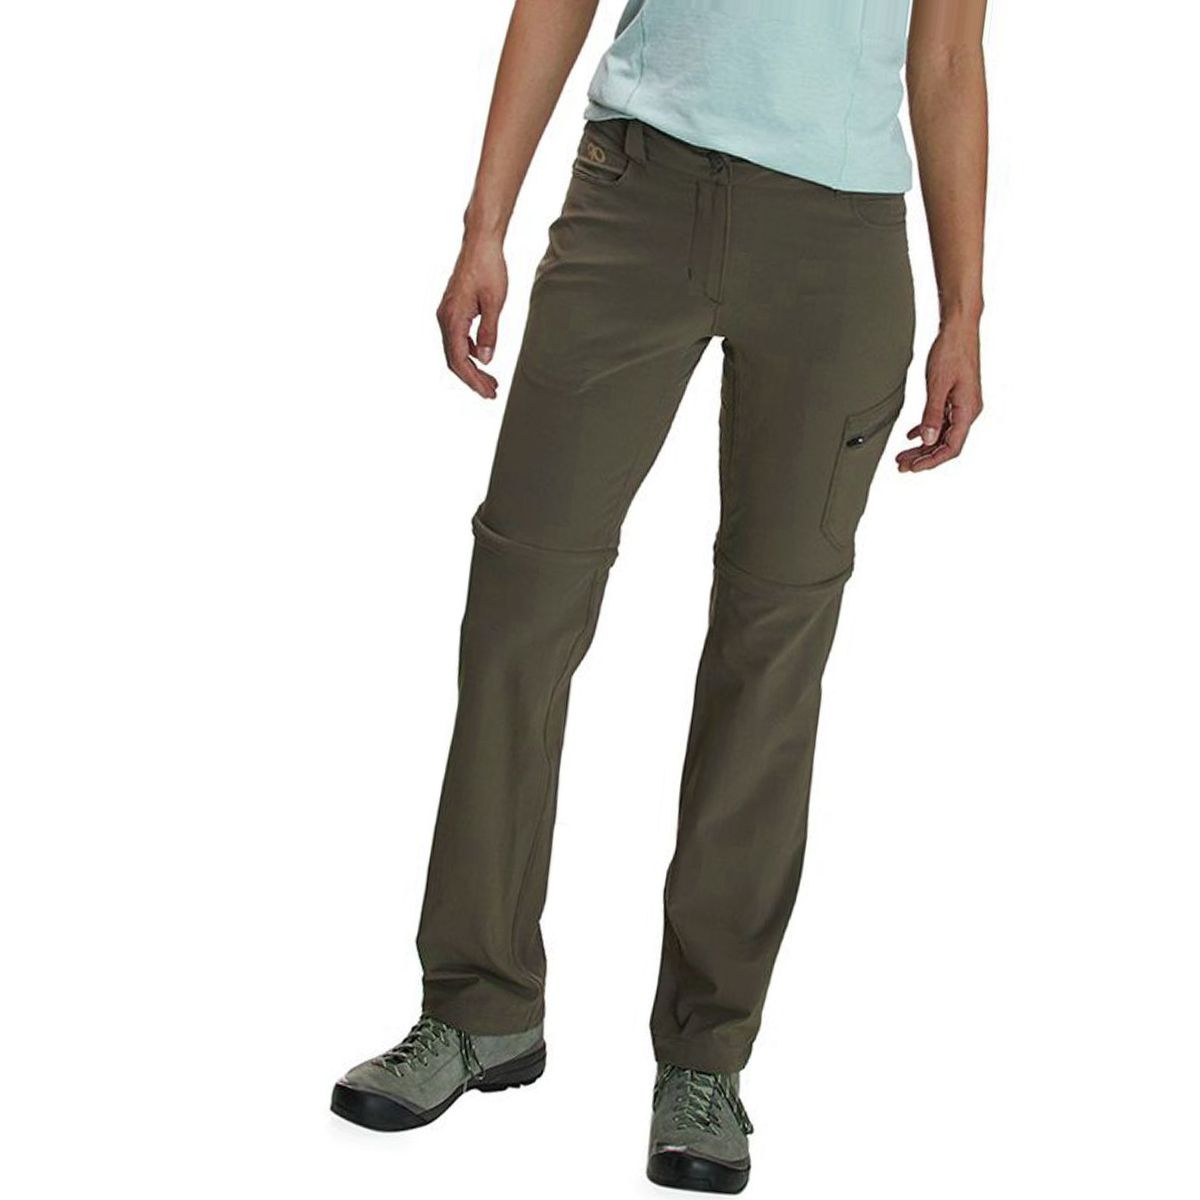 Outdoor Research Ferrosi Convertible Pant - Women's